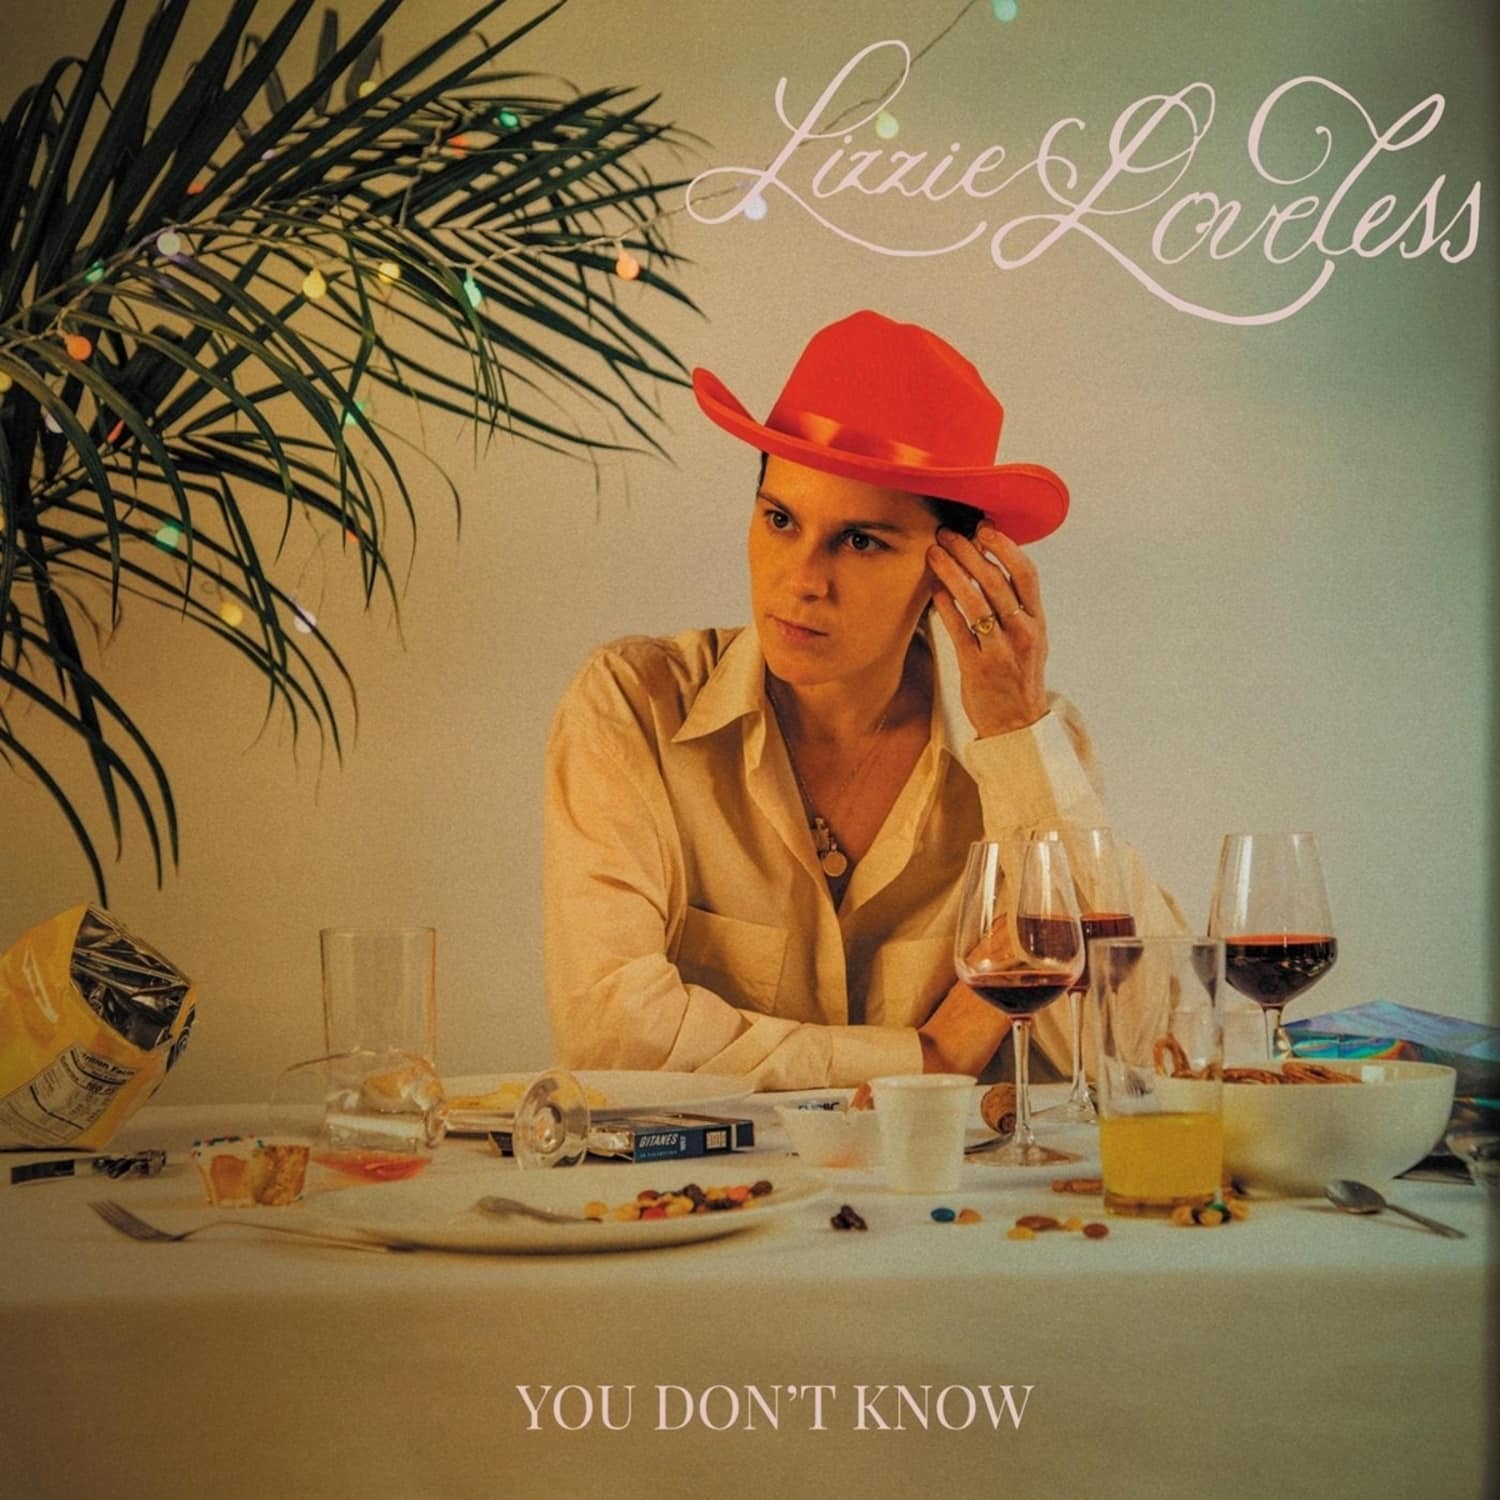  Lizzie Loveless - YOU DON T KNOW 